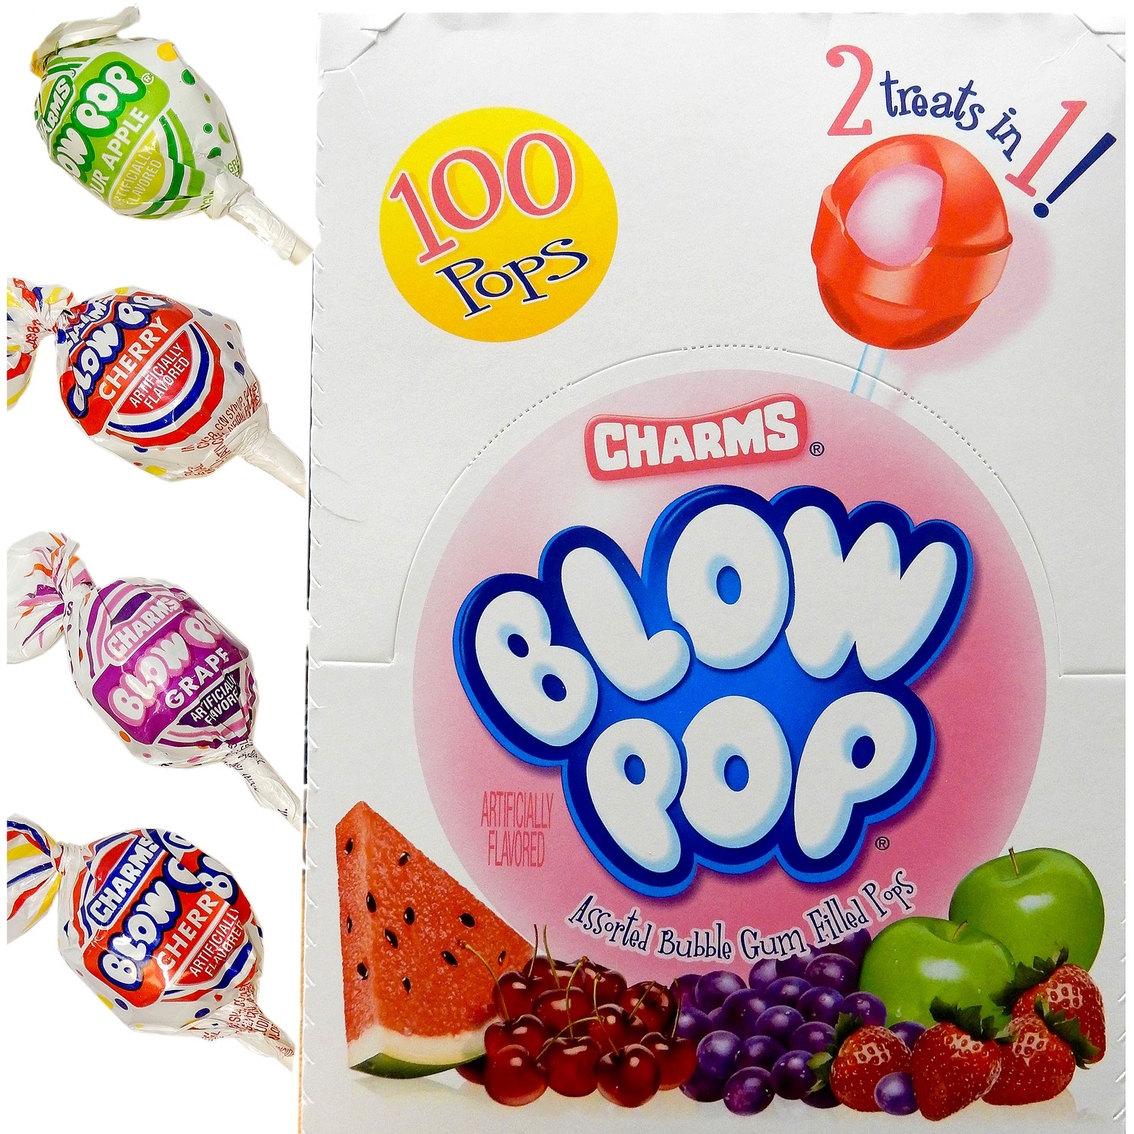 Charms Blow Pops Assorted Flavors 100 Ct. Box.